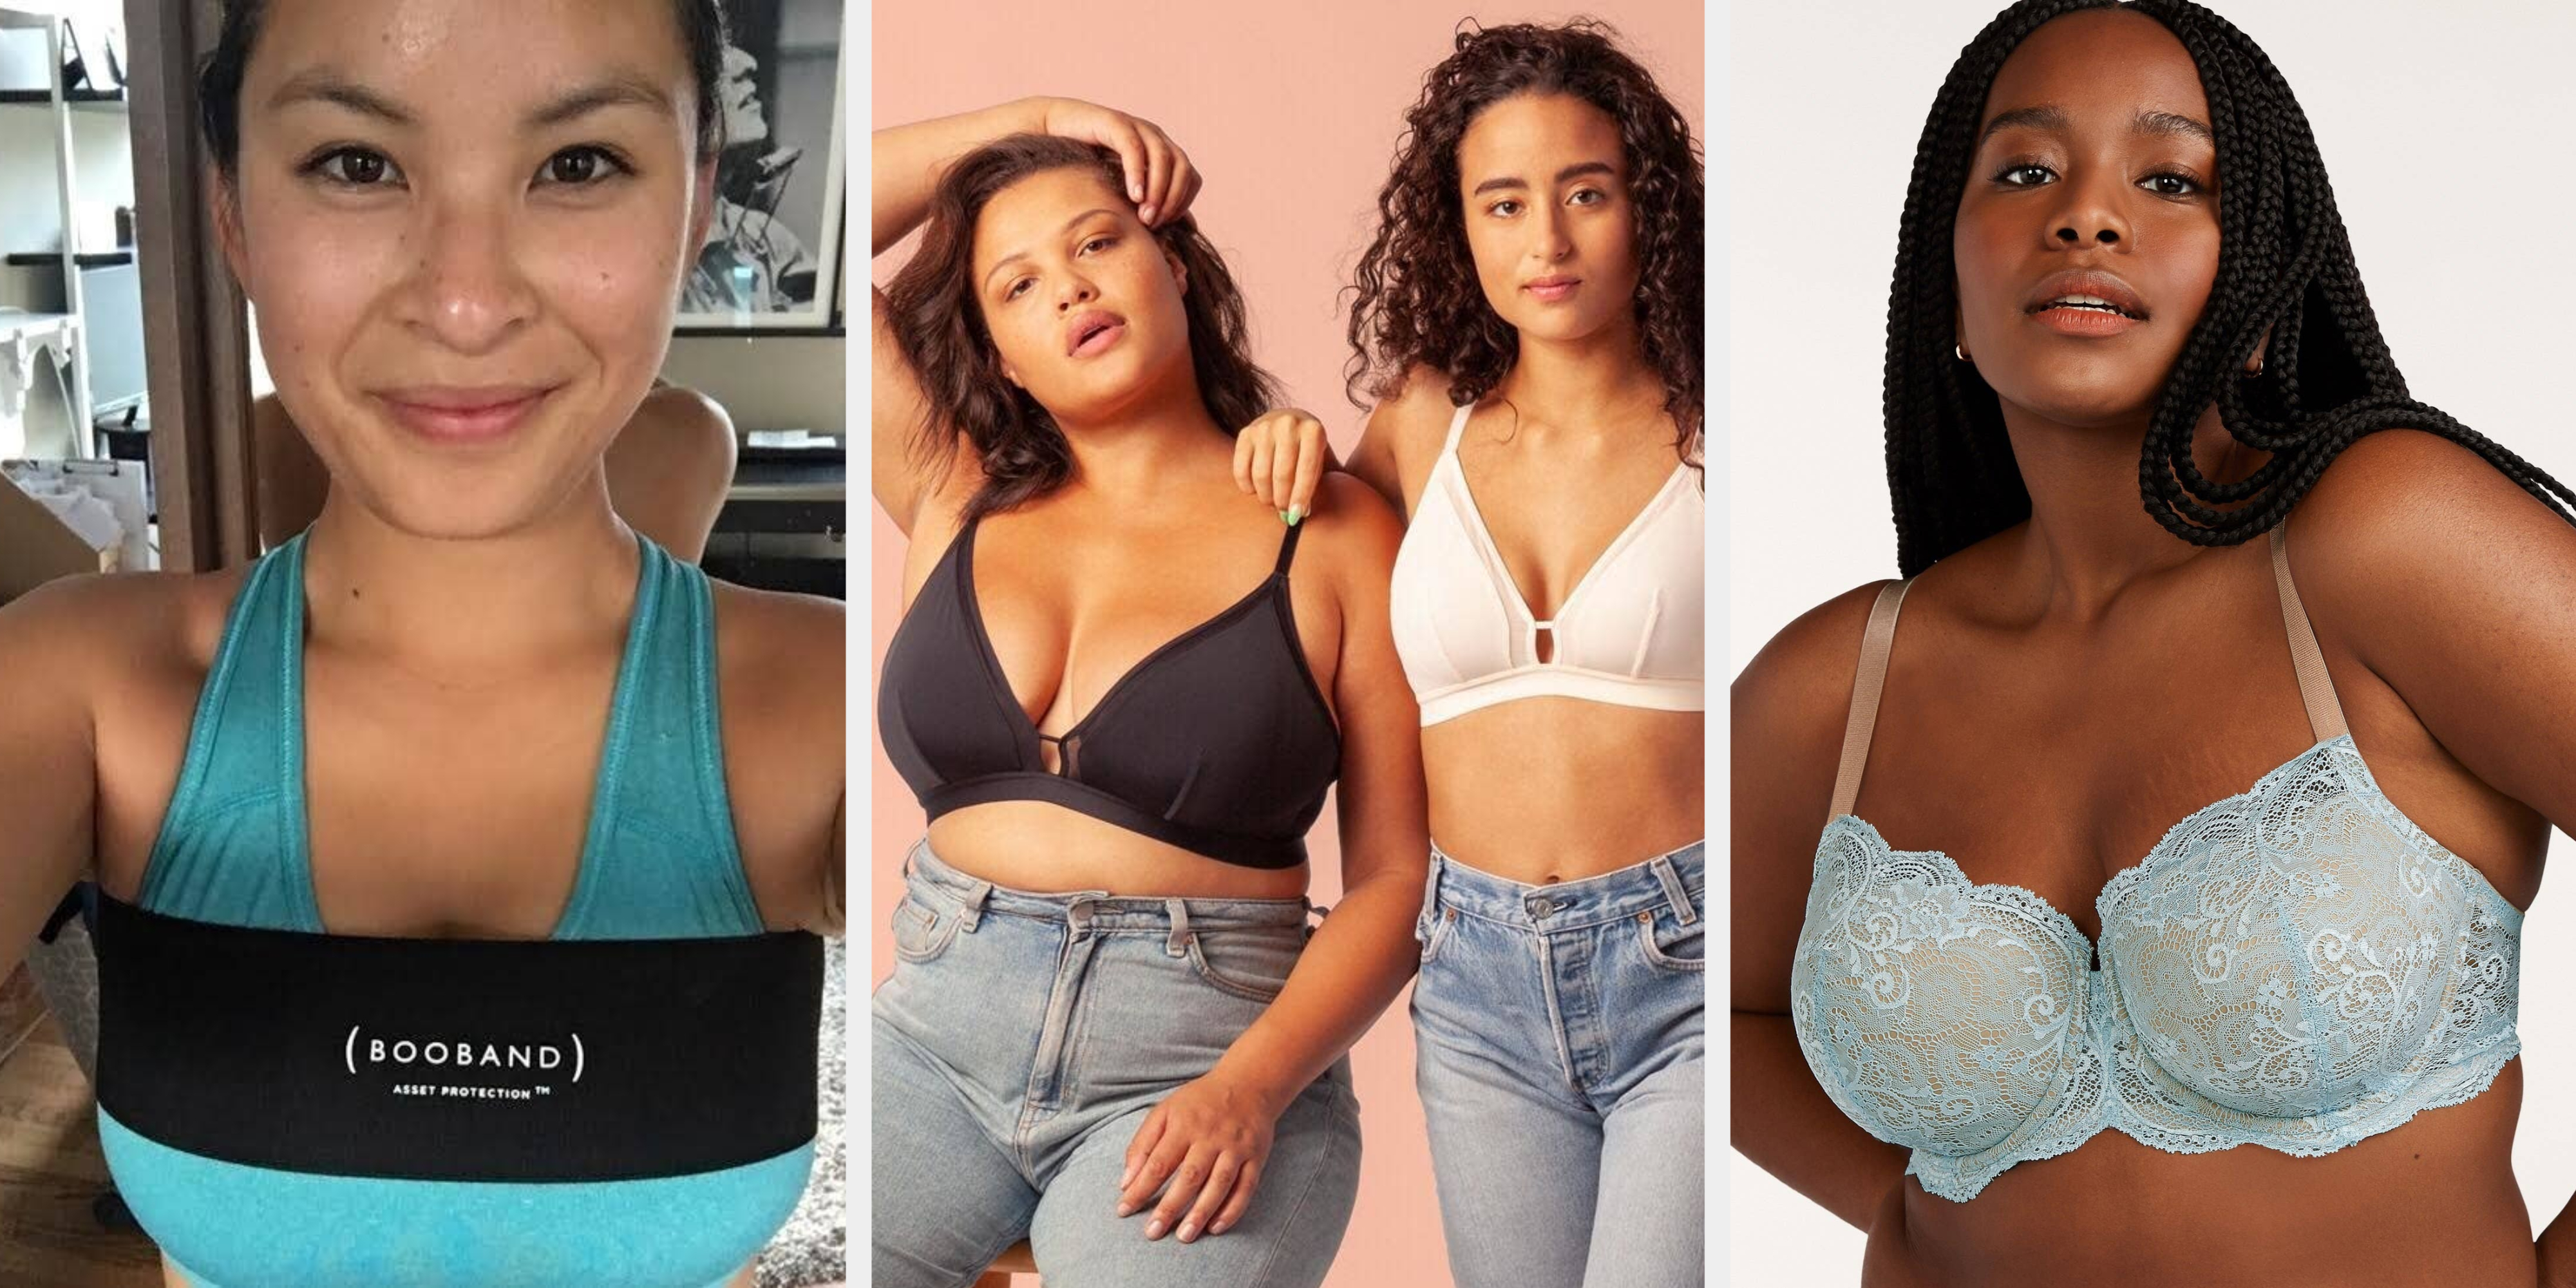 Buzzfeed is advertising this bra that is amazing for big boobs